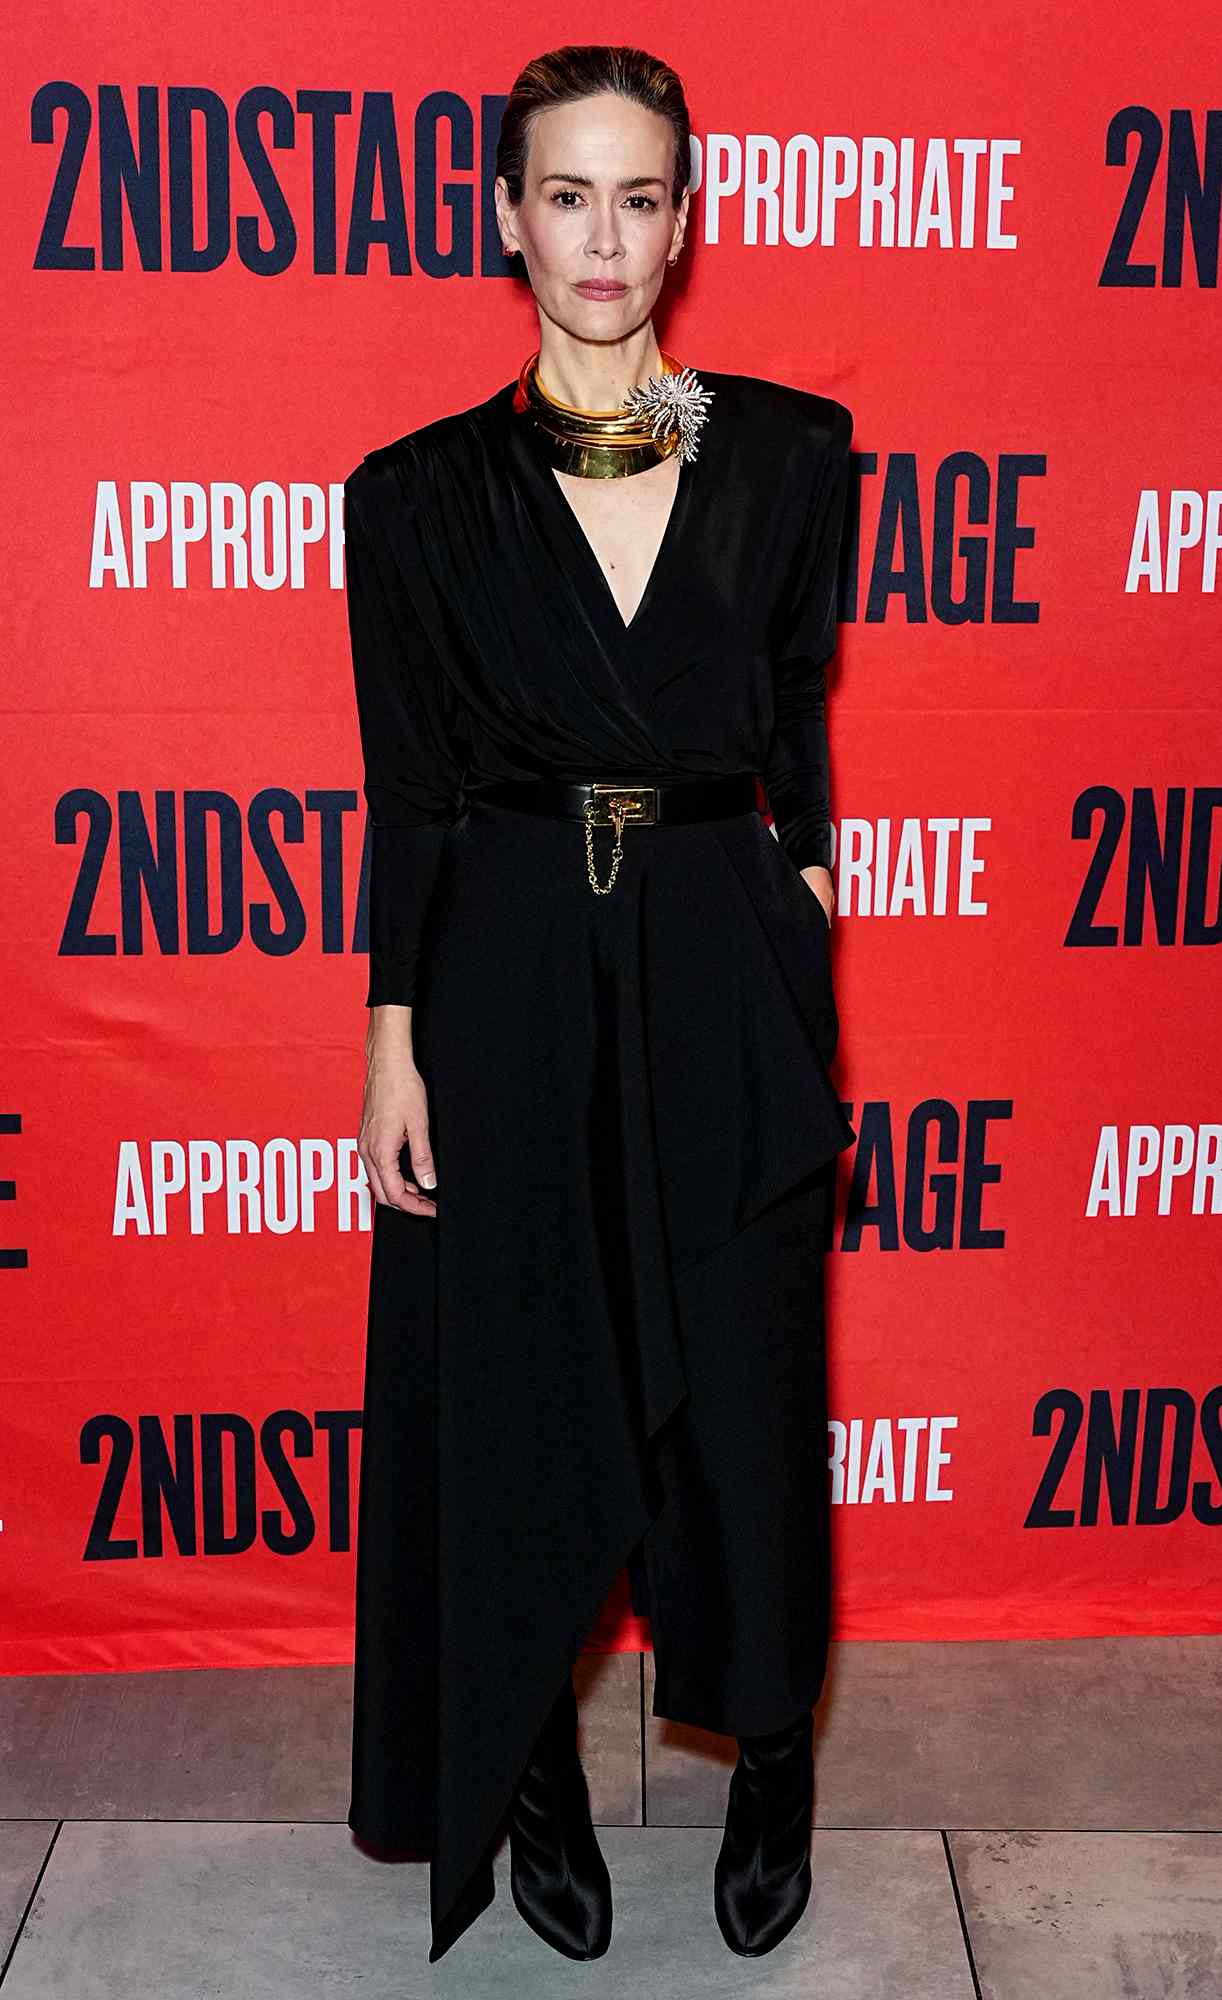 Sarah Paulson poses at the opening night of the Second Stage Theater play "Appropriate" 